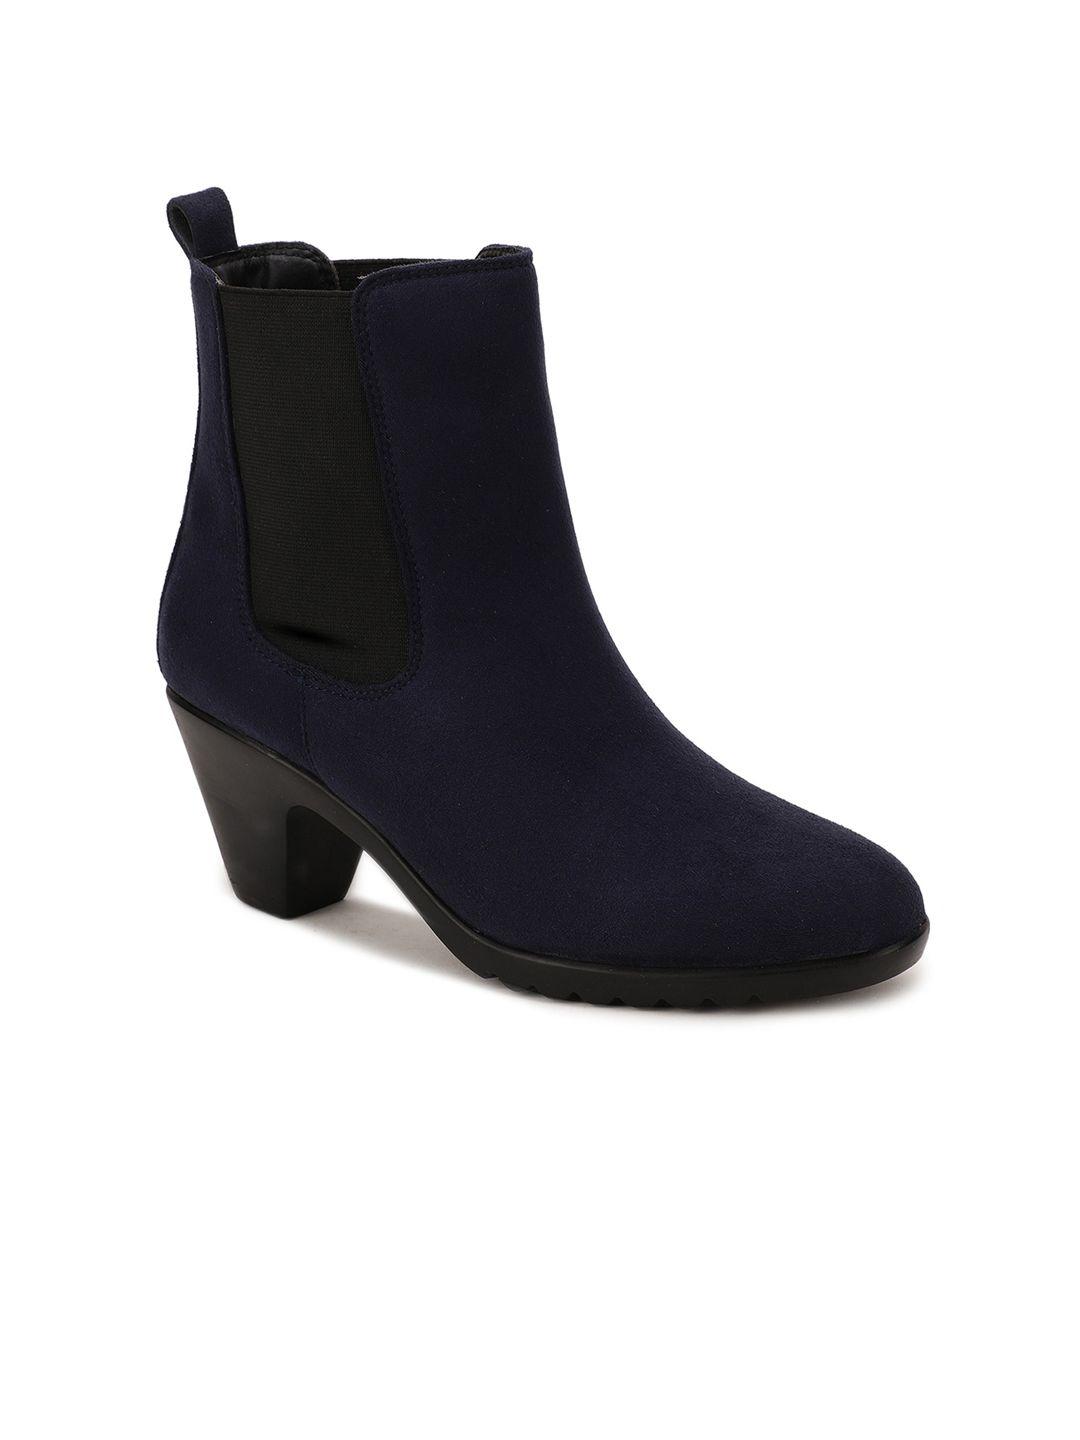 bruno manetti women navy blue solid suede flat boots